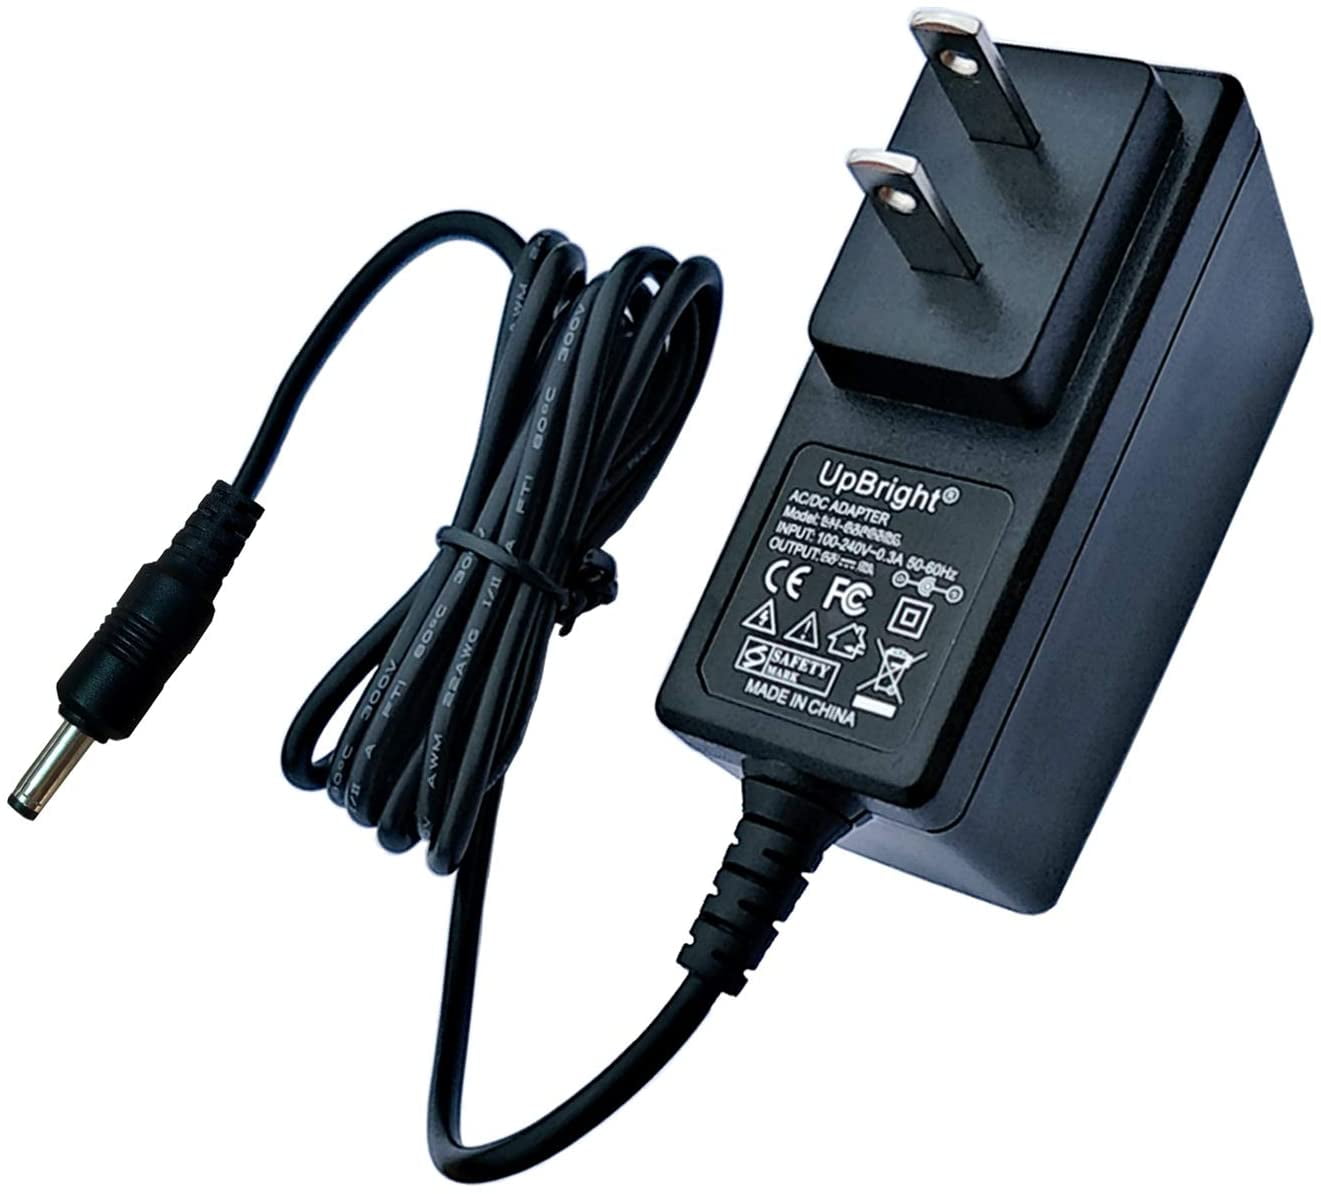 AC Adapter for Casio DZ1 DM100 CT-420 CT-607 CT-620 CT-840 HZ600 PN5521 Keyboard with LED Indicator 5 Feet 